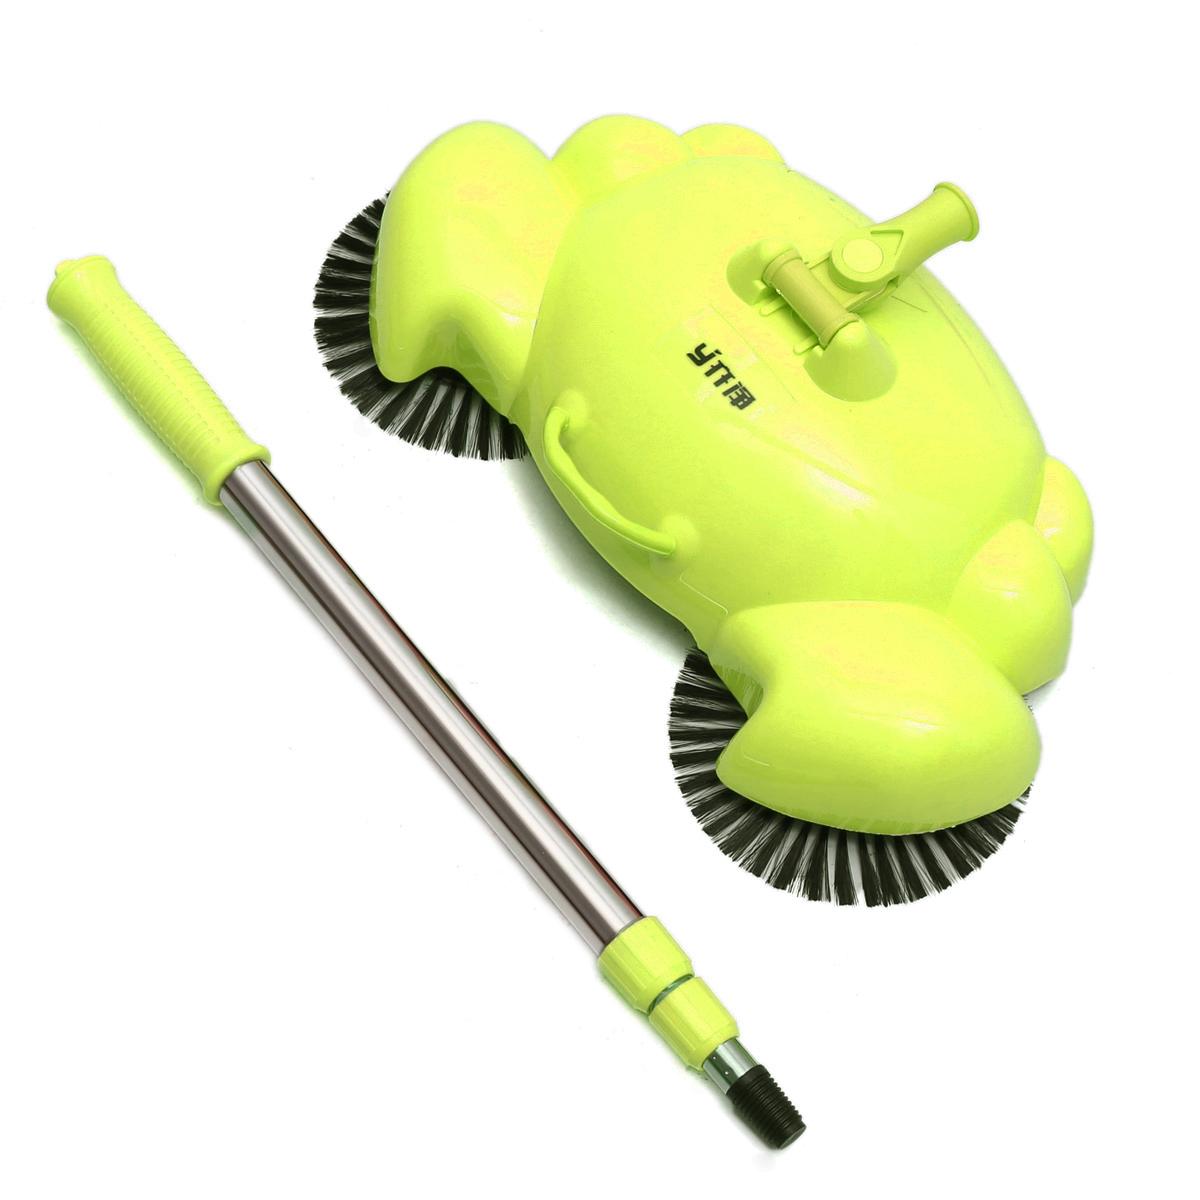 Lazy-Spin-Hand-Push-Sweeper-Broom-Floor-Sweeper-Cleaning-Mop-Without-Electricty-1548113-3